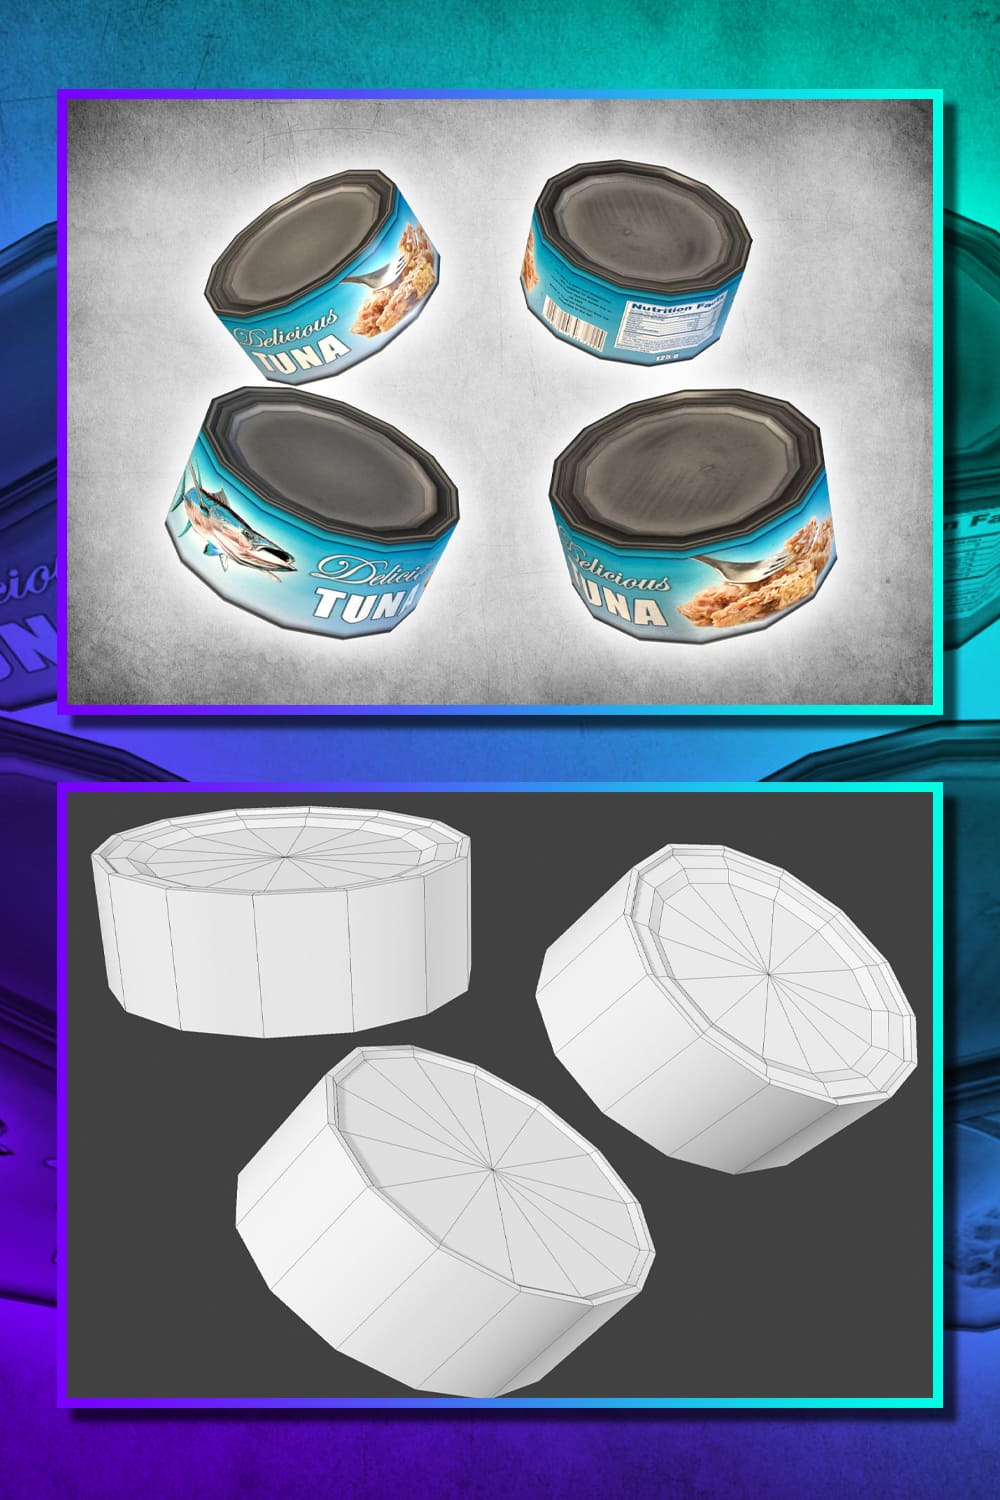 Two side-by-side images of realistic tuna cans and mock-up tuna cans.